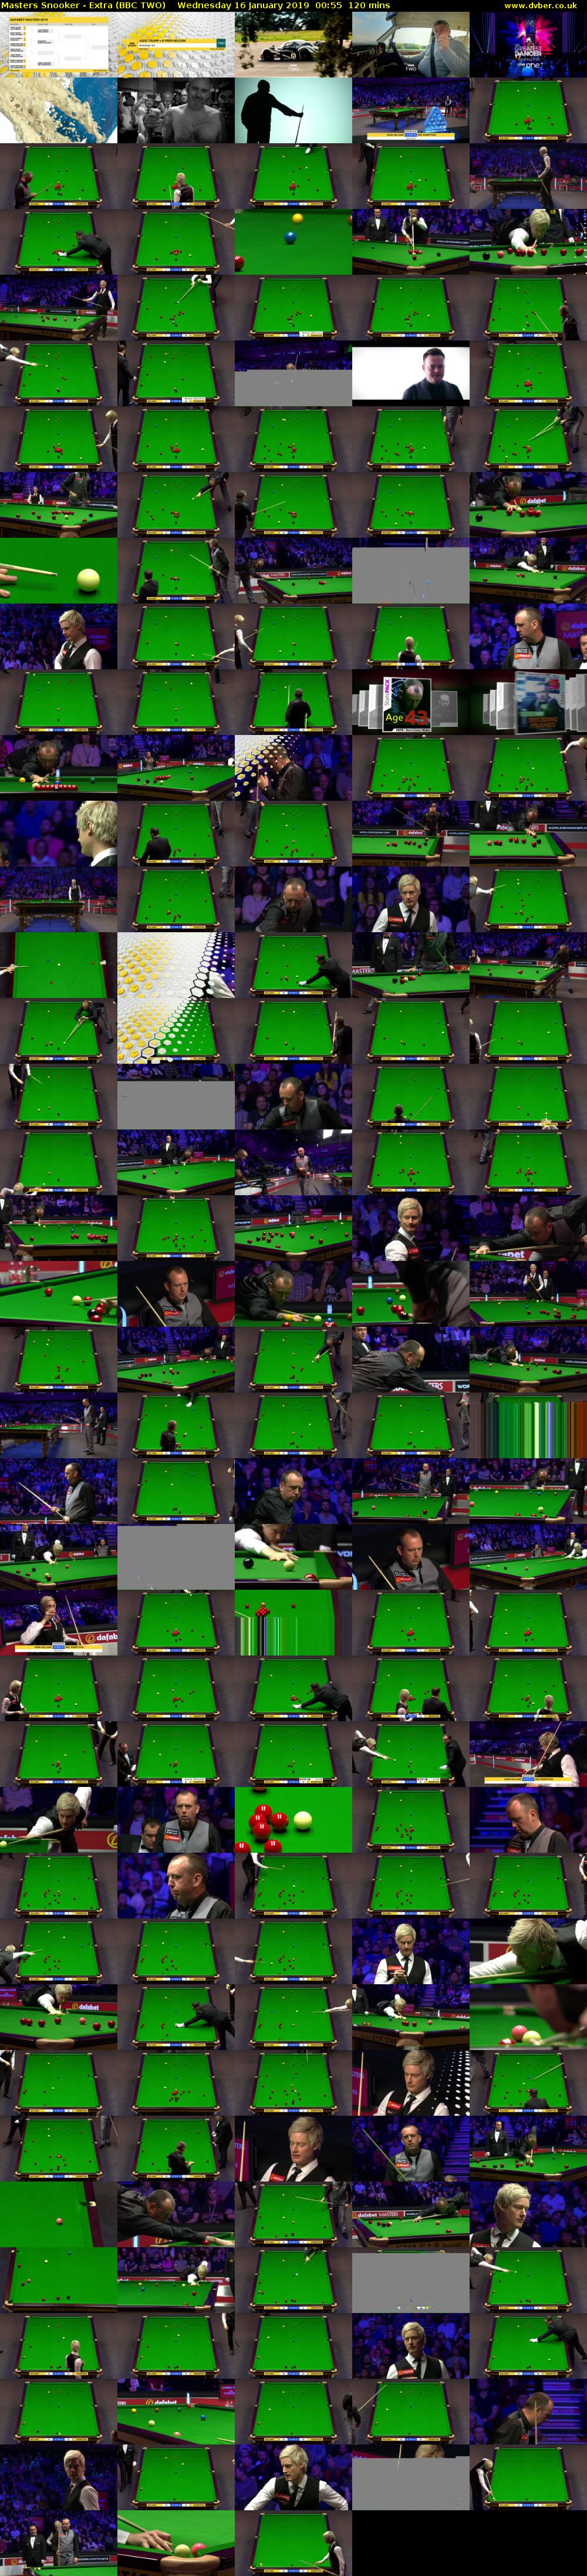 Masters Snooker - Extra (BBC TWO) Wednesday 16 January 2019 00:55 - 02:55